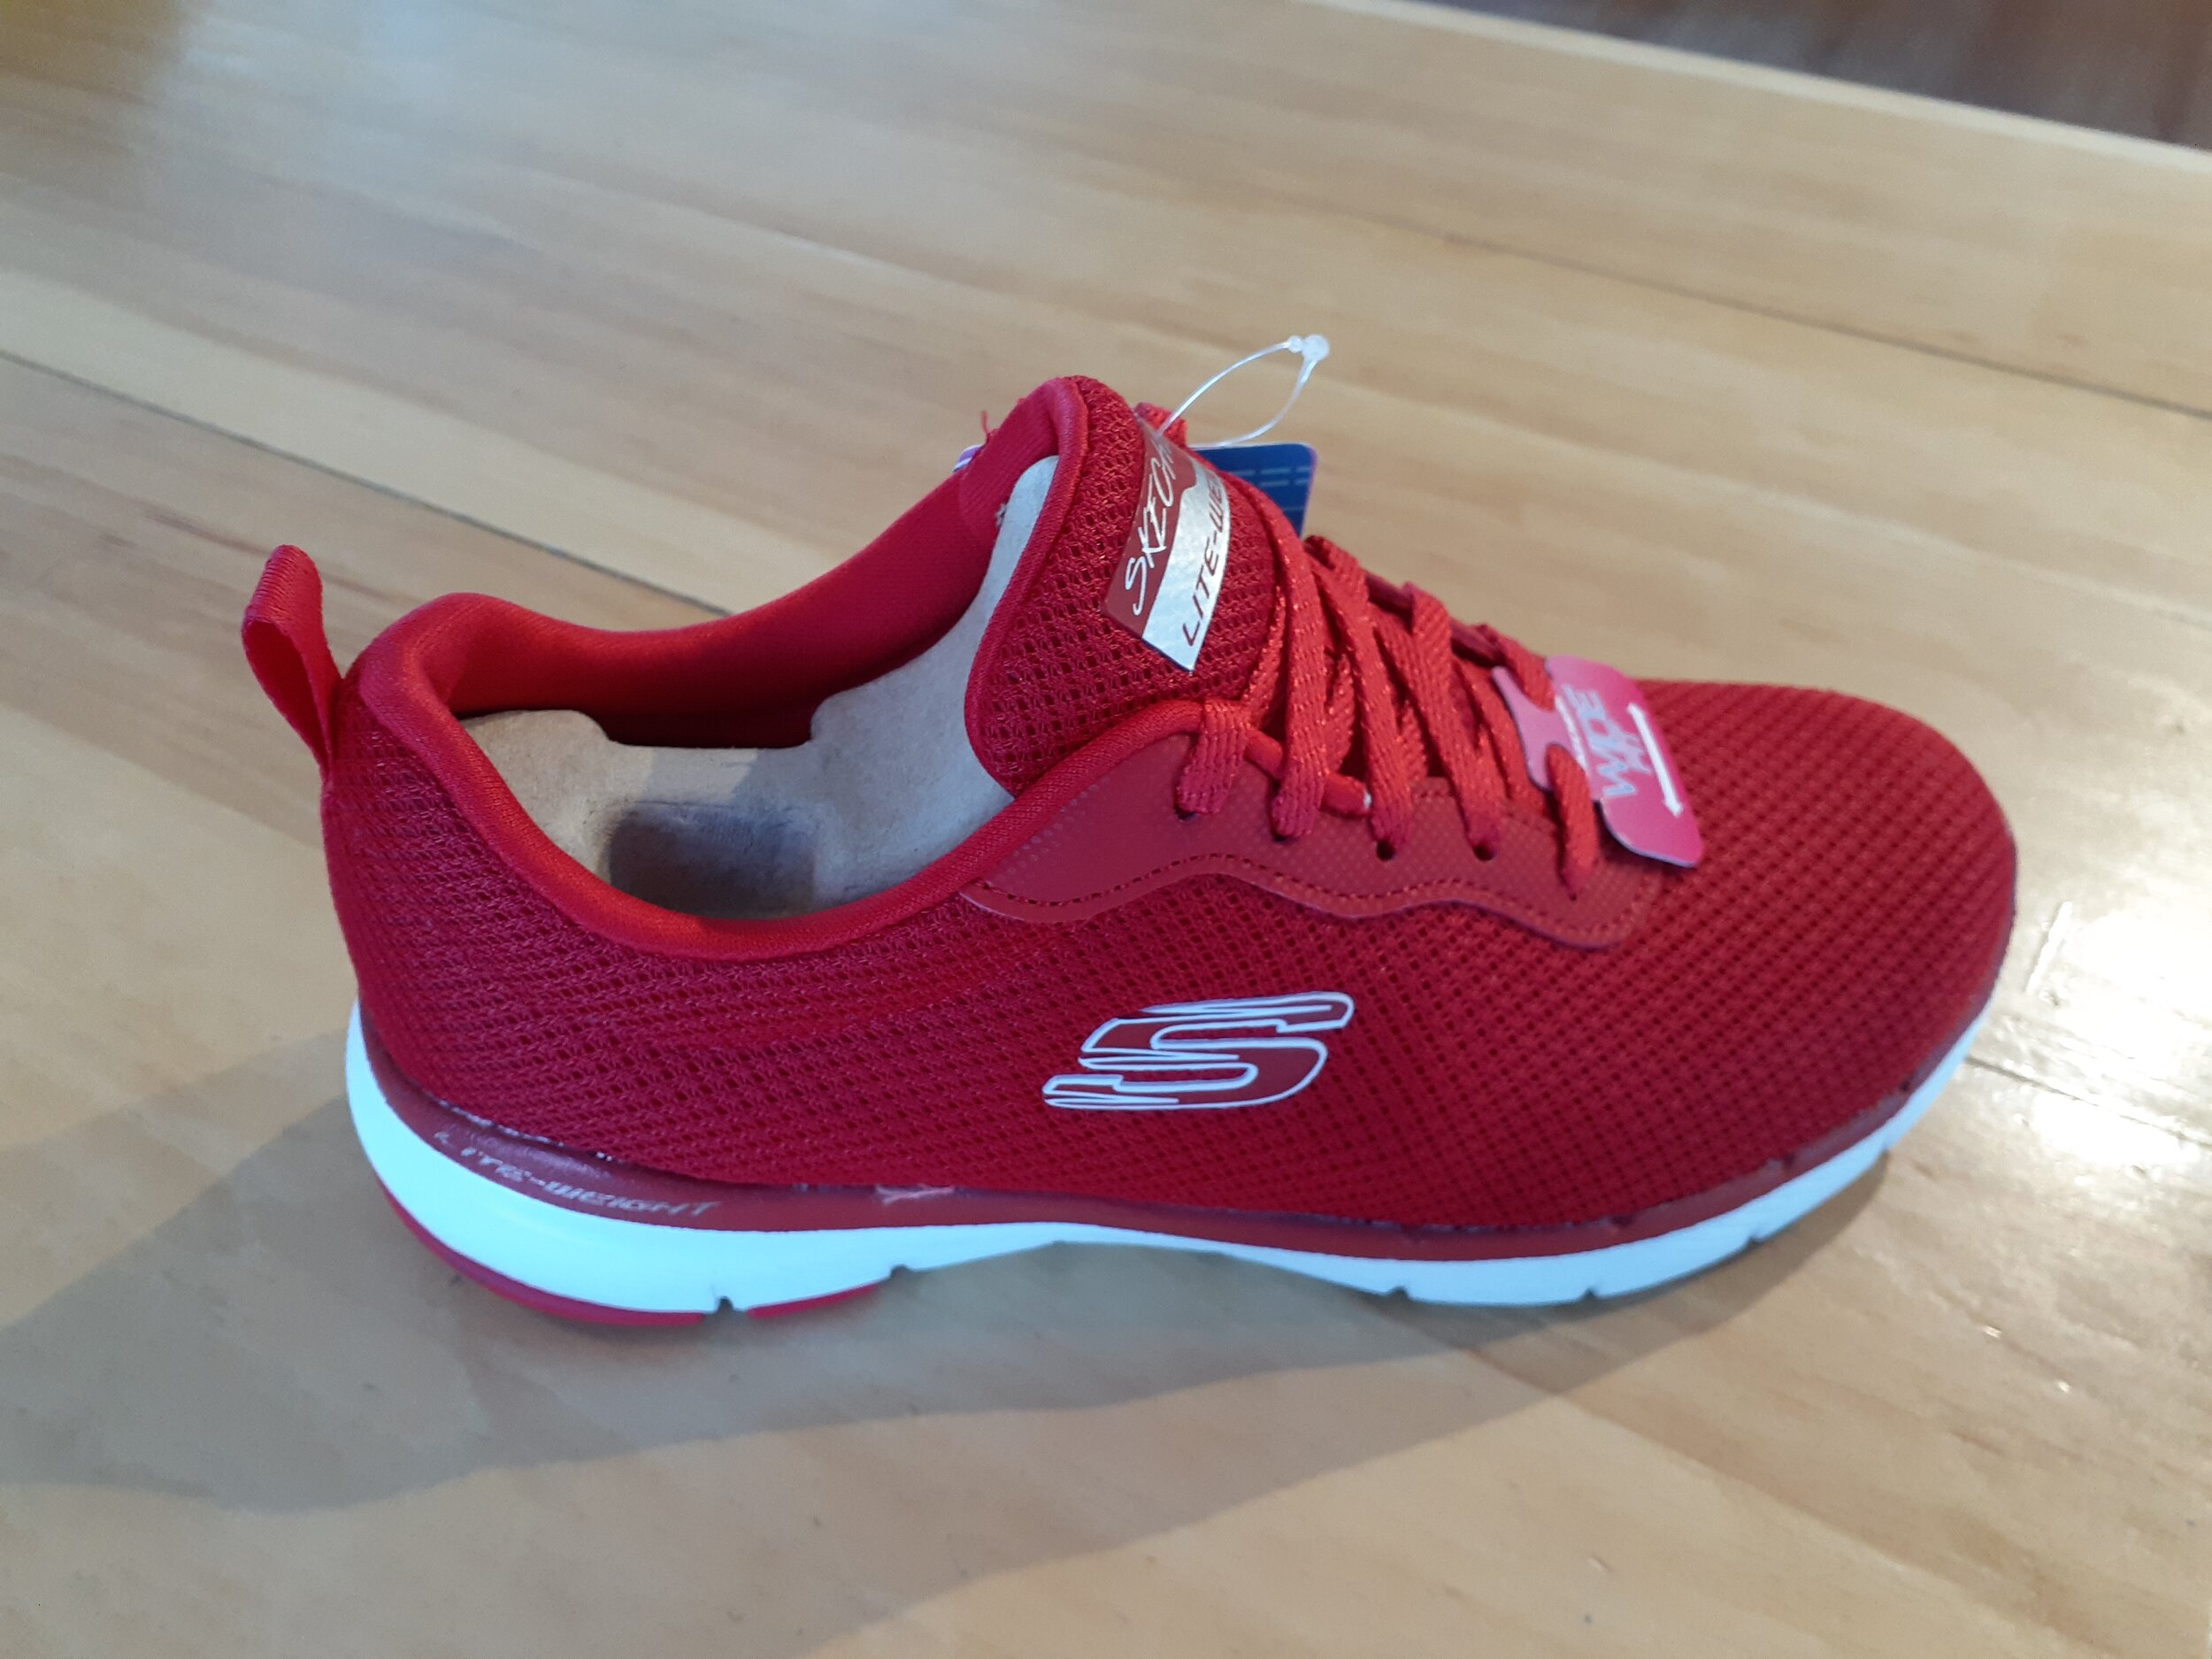 FLEX APPEAL 3.0 FIRST RED 13070W - WIDE WIDTH Alex and Lily's Shoe Shoppe